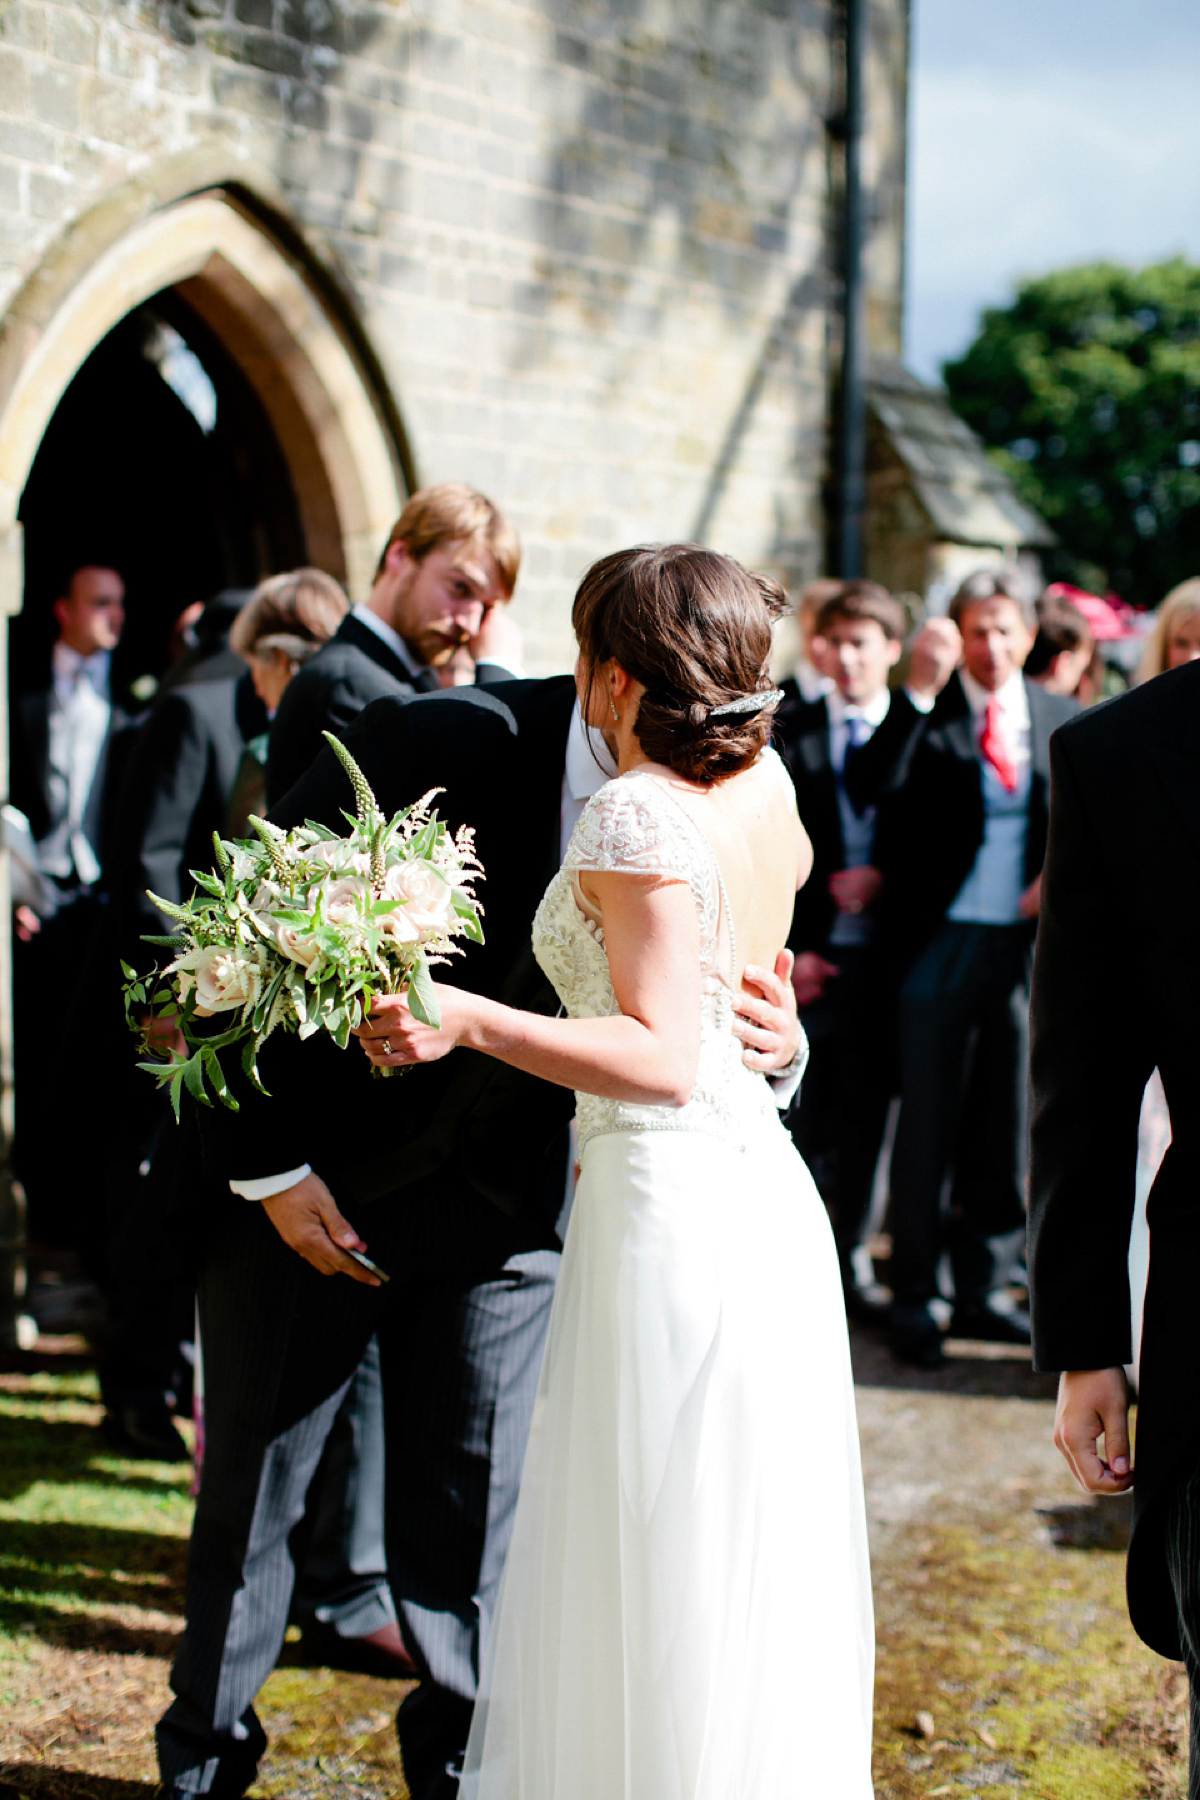 Sarah wore a Halfpenny London gown for her elegant English country garden wedding.  Photography by Helen Cawte.